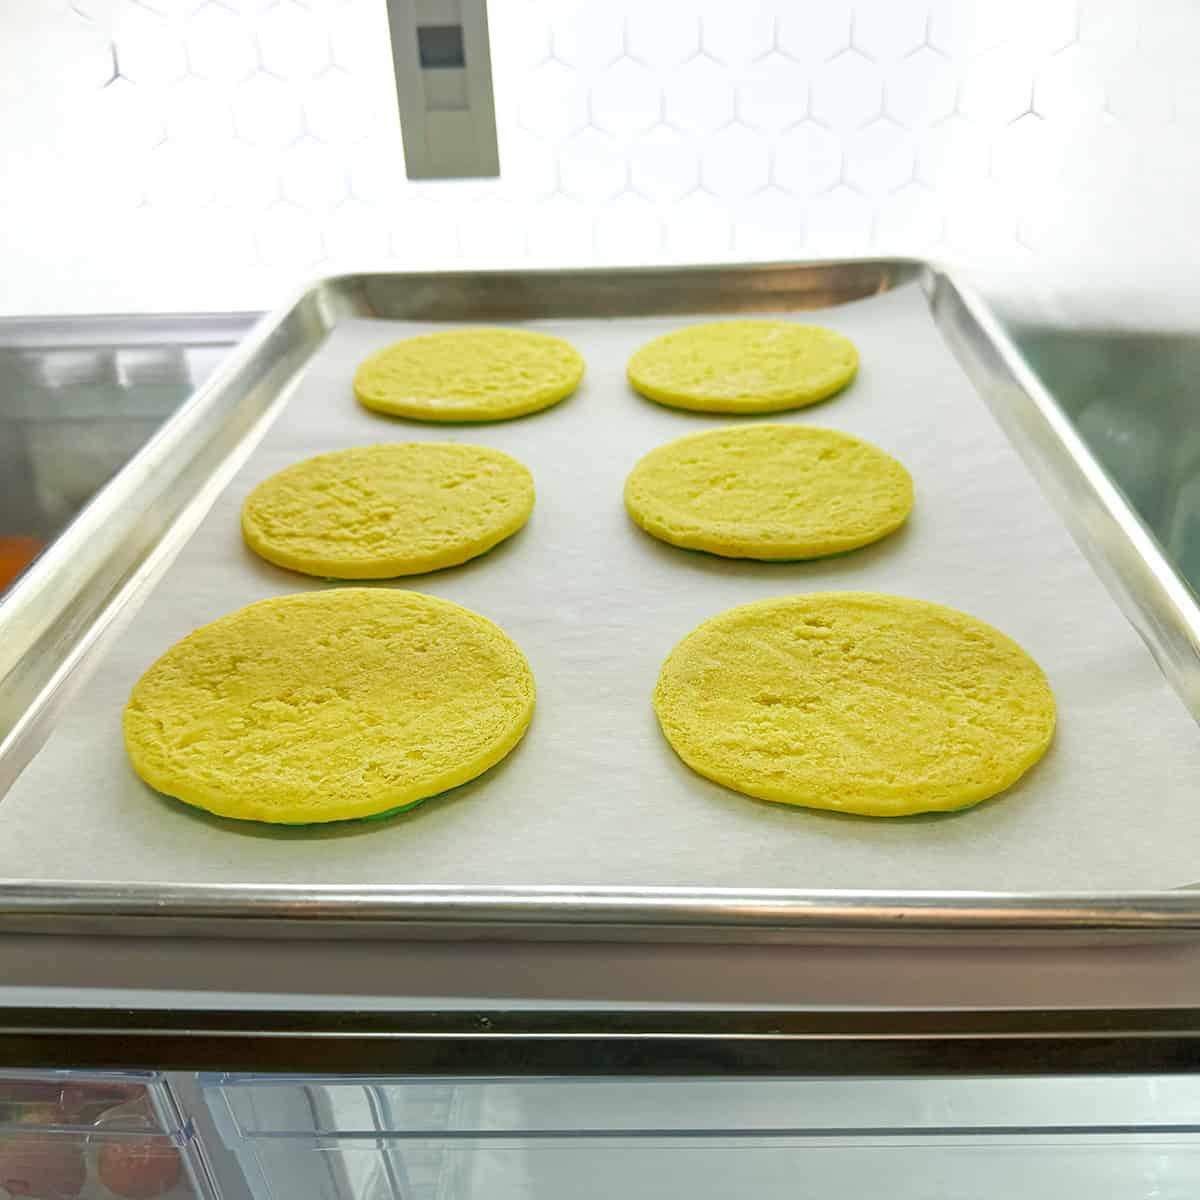 Cookies that have icing and turned upside down then refrigerated, this flattens the icing.